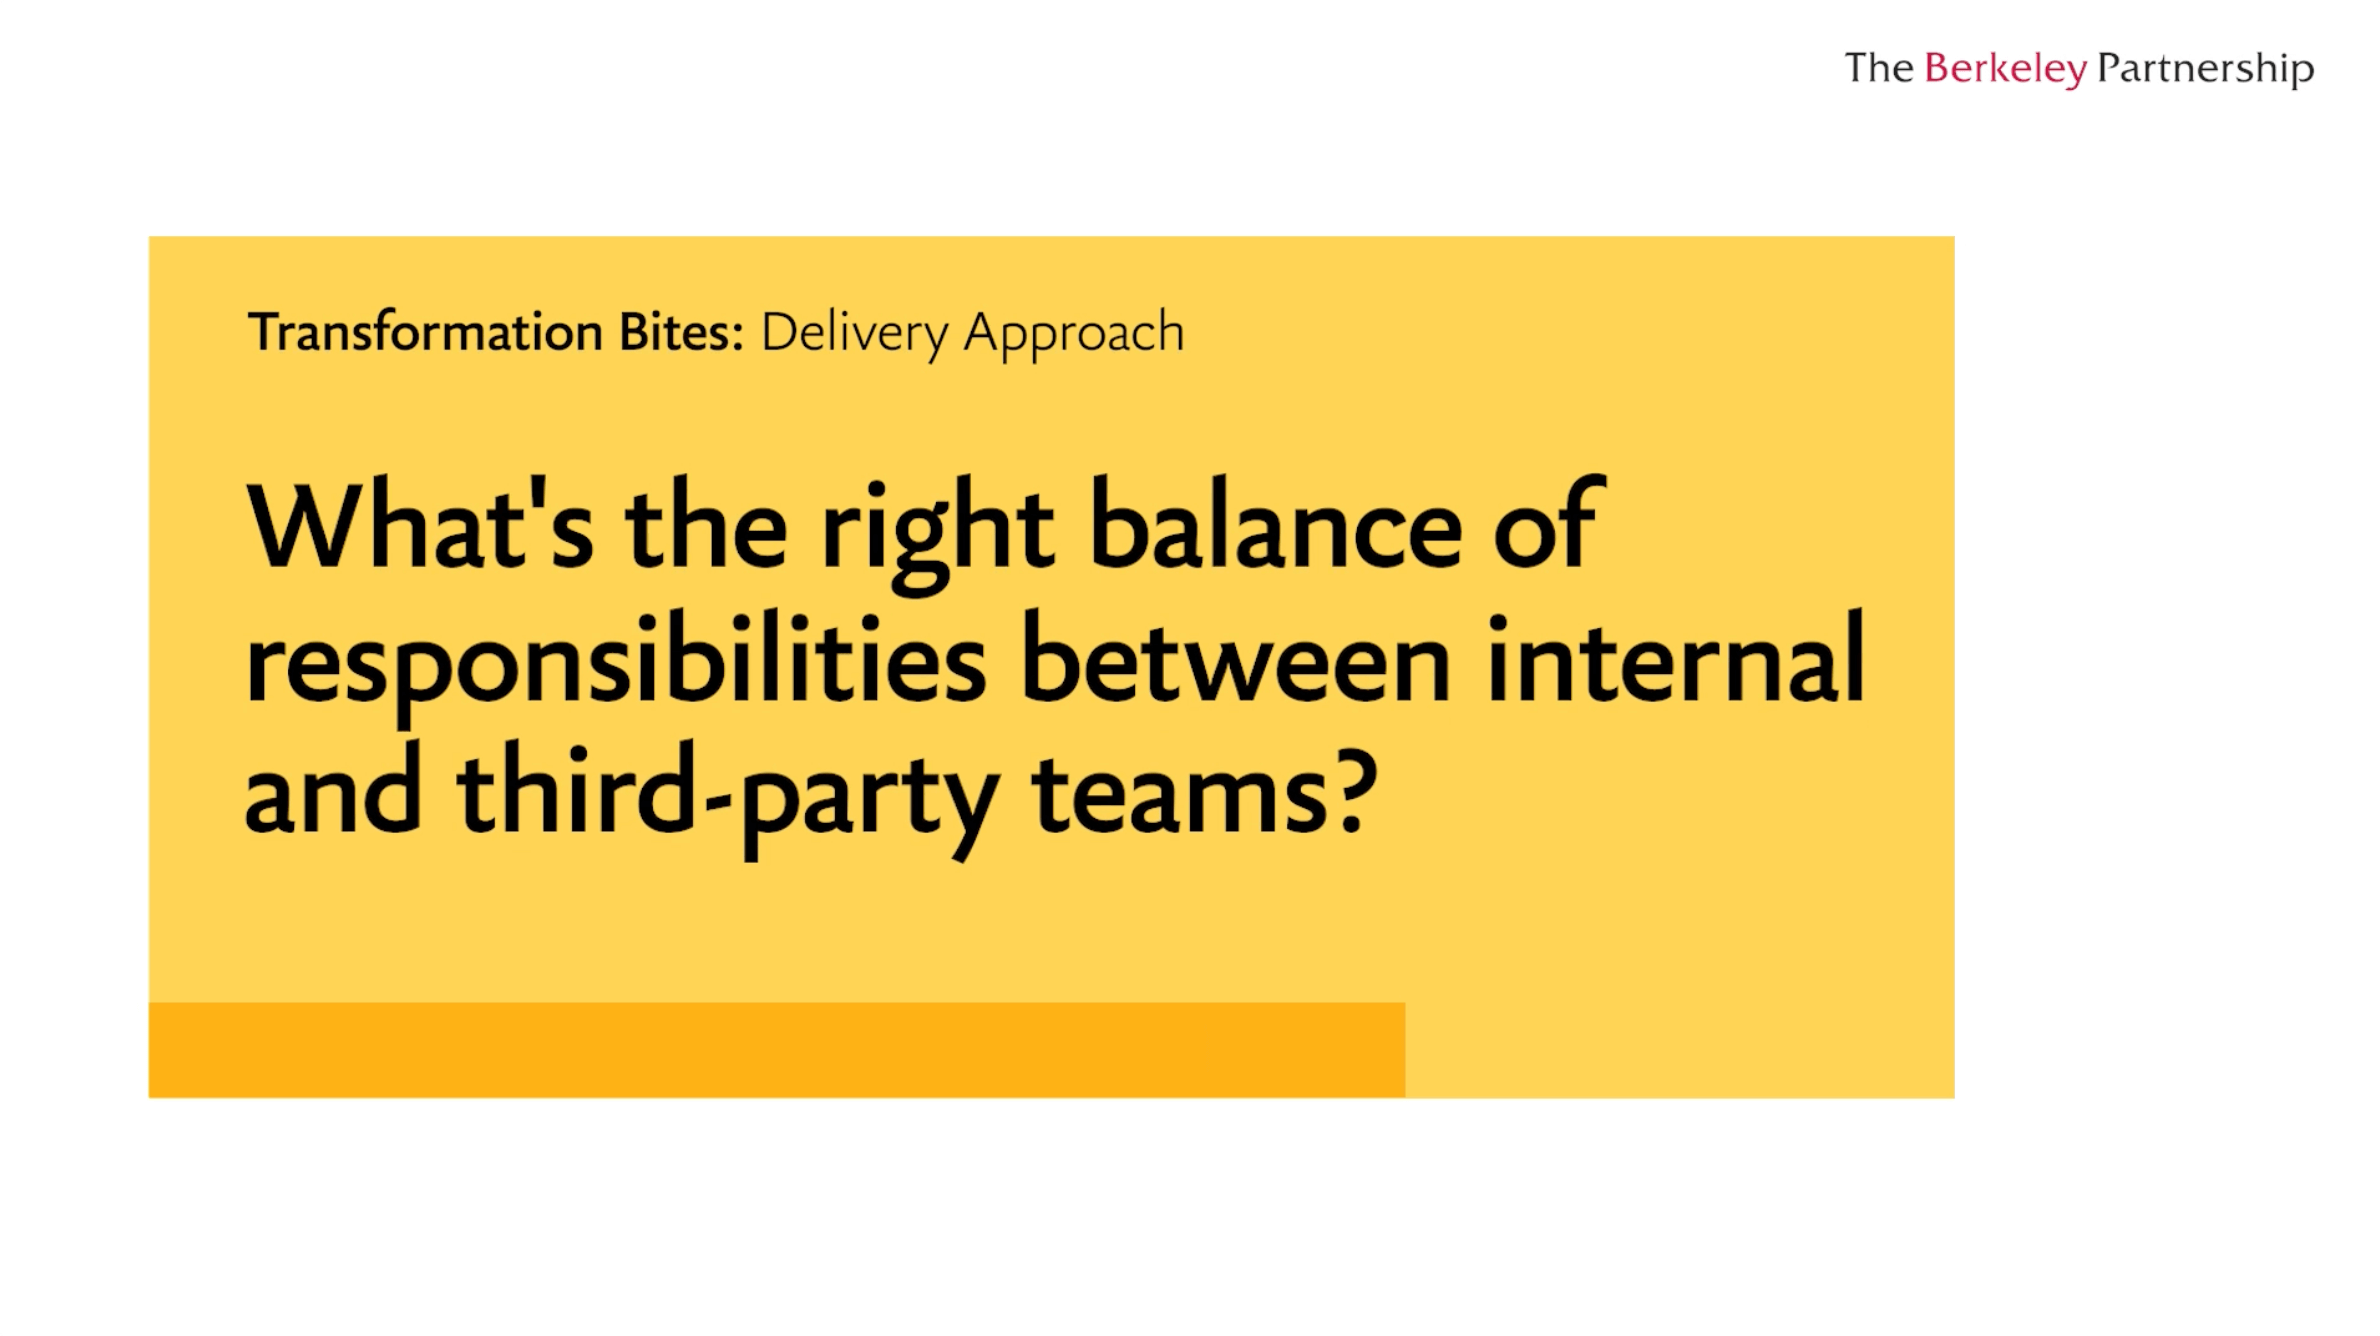 What's the right balance of responsibilities between internal and third-party teams?